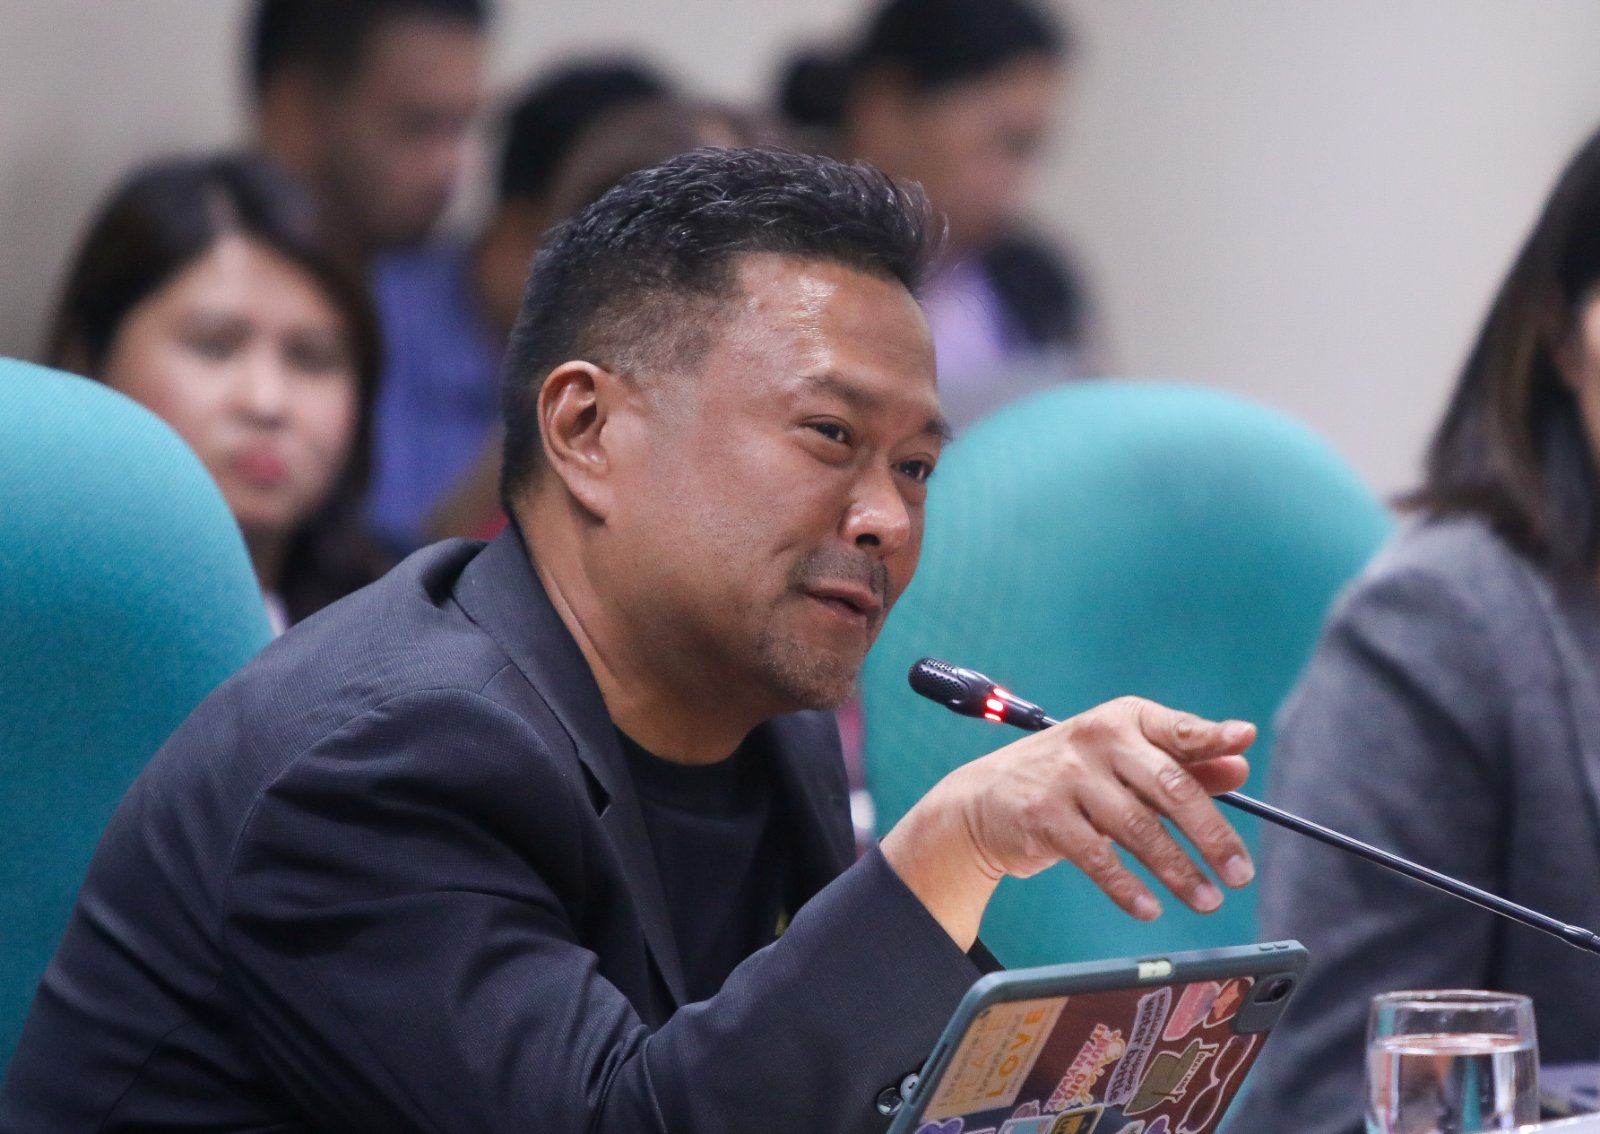 ejercito: probe doctors’ ‘collusion’ with drug firm